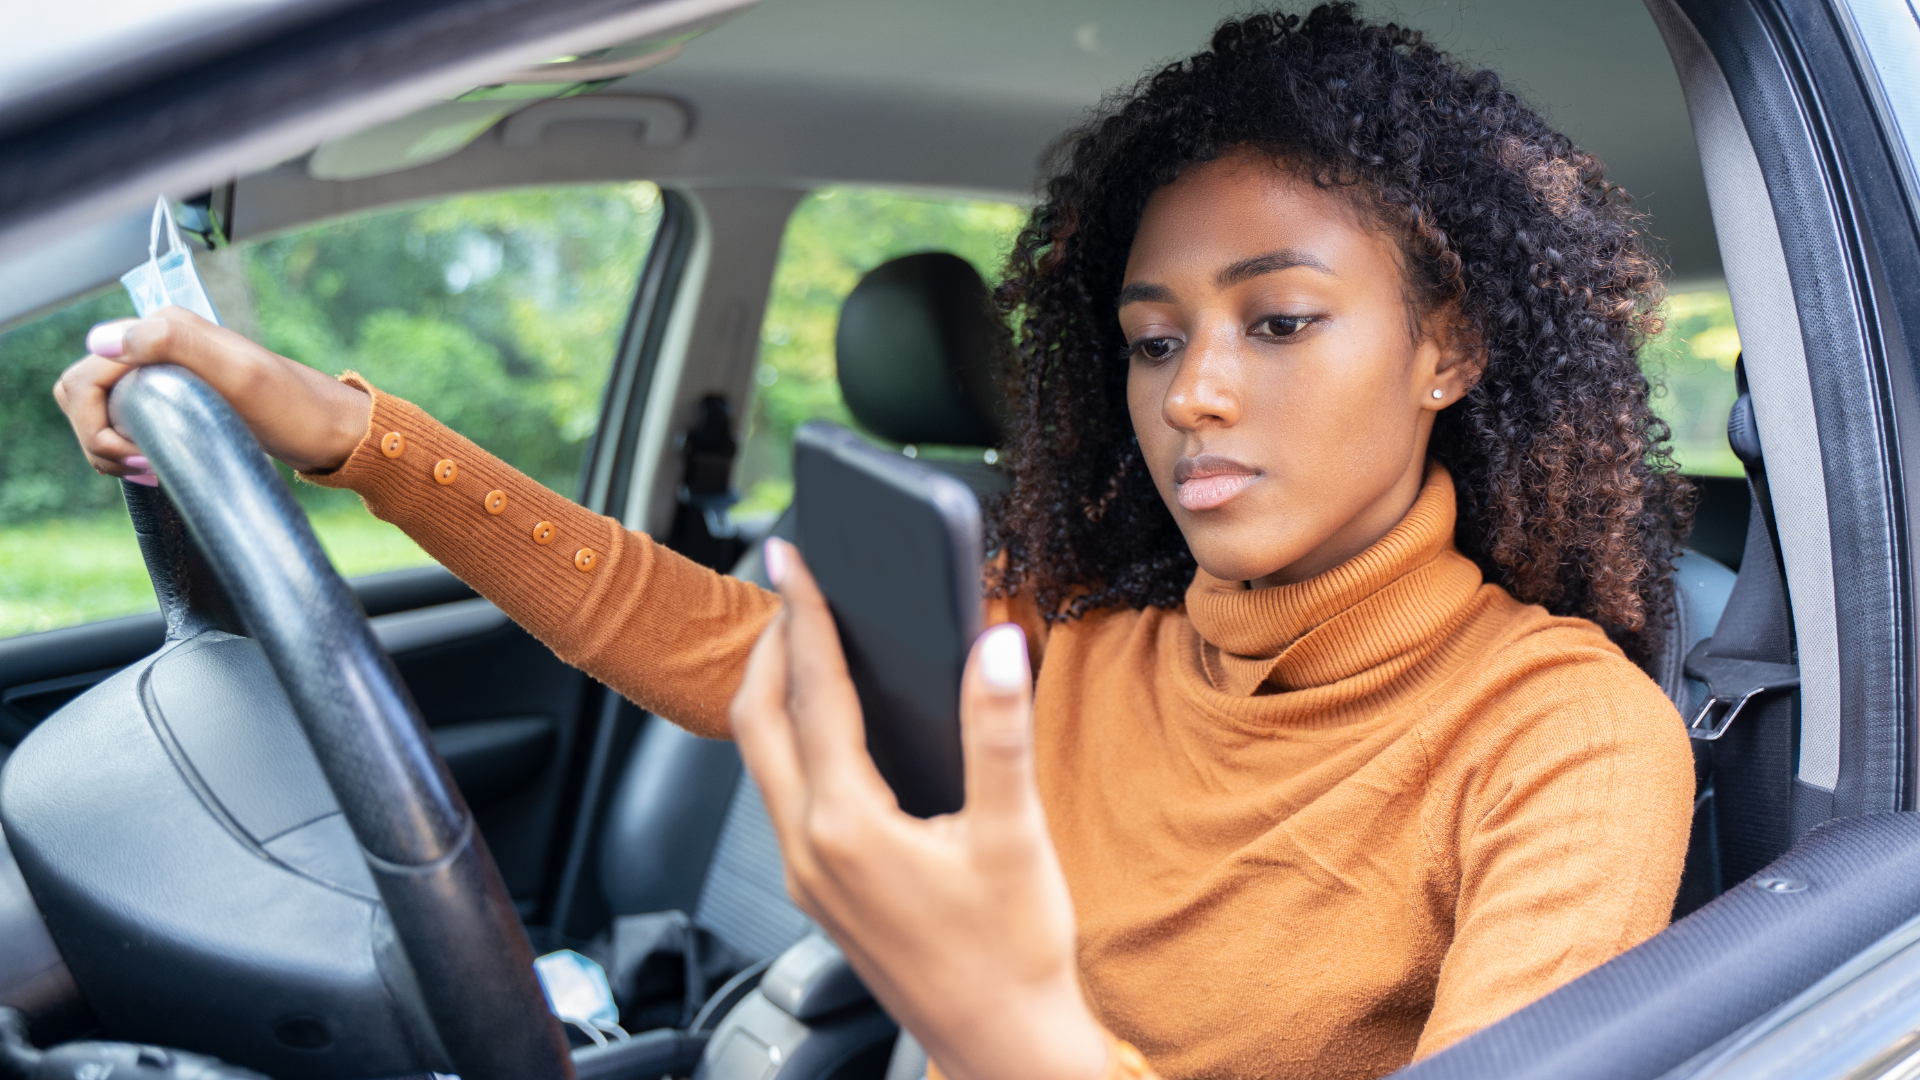 Woman Distracted Driving by Looking at Cell Phone